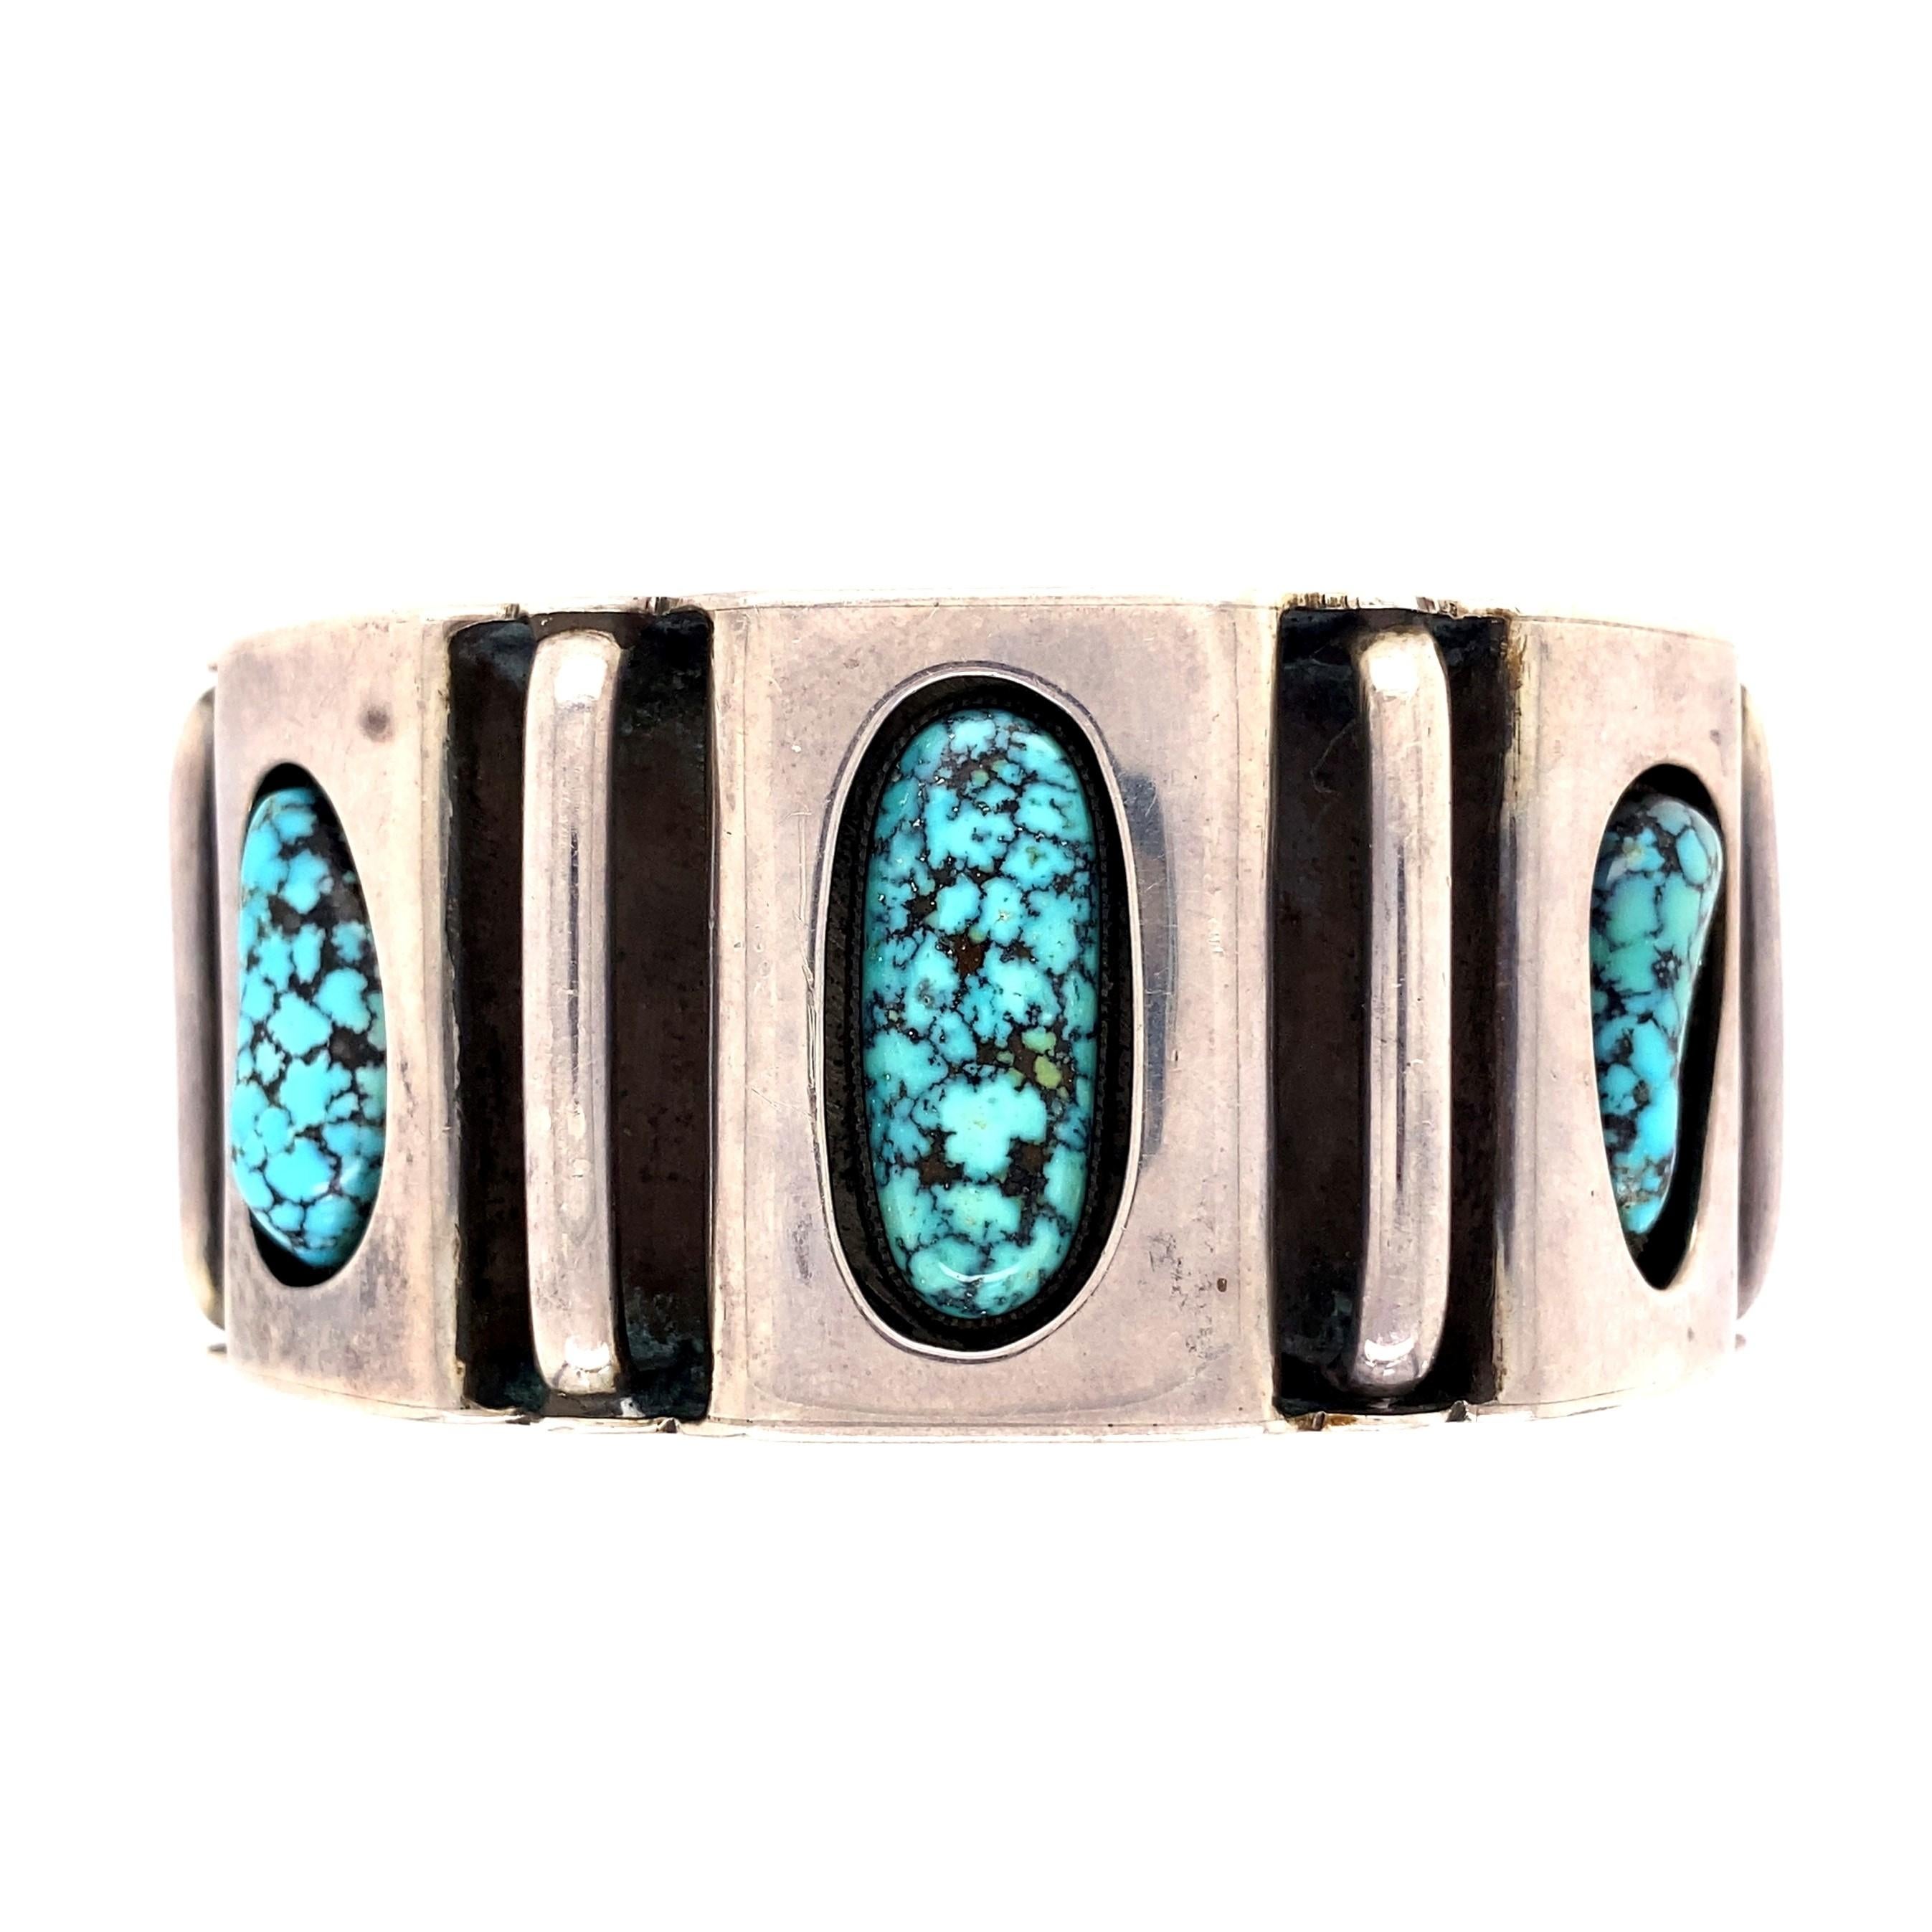 Oval Cut Native American Navajo Spider Web Turquoise Silver 925 Cuff Bracelet